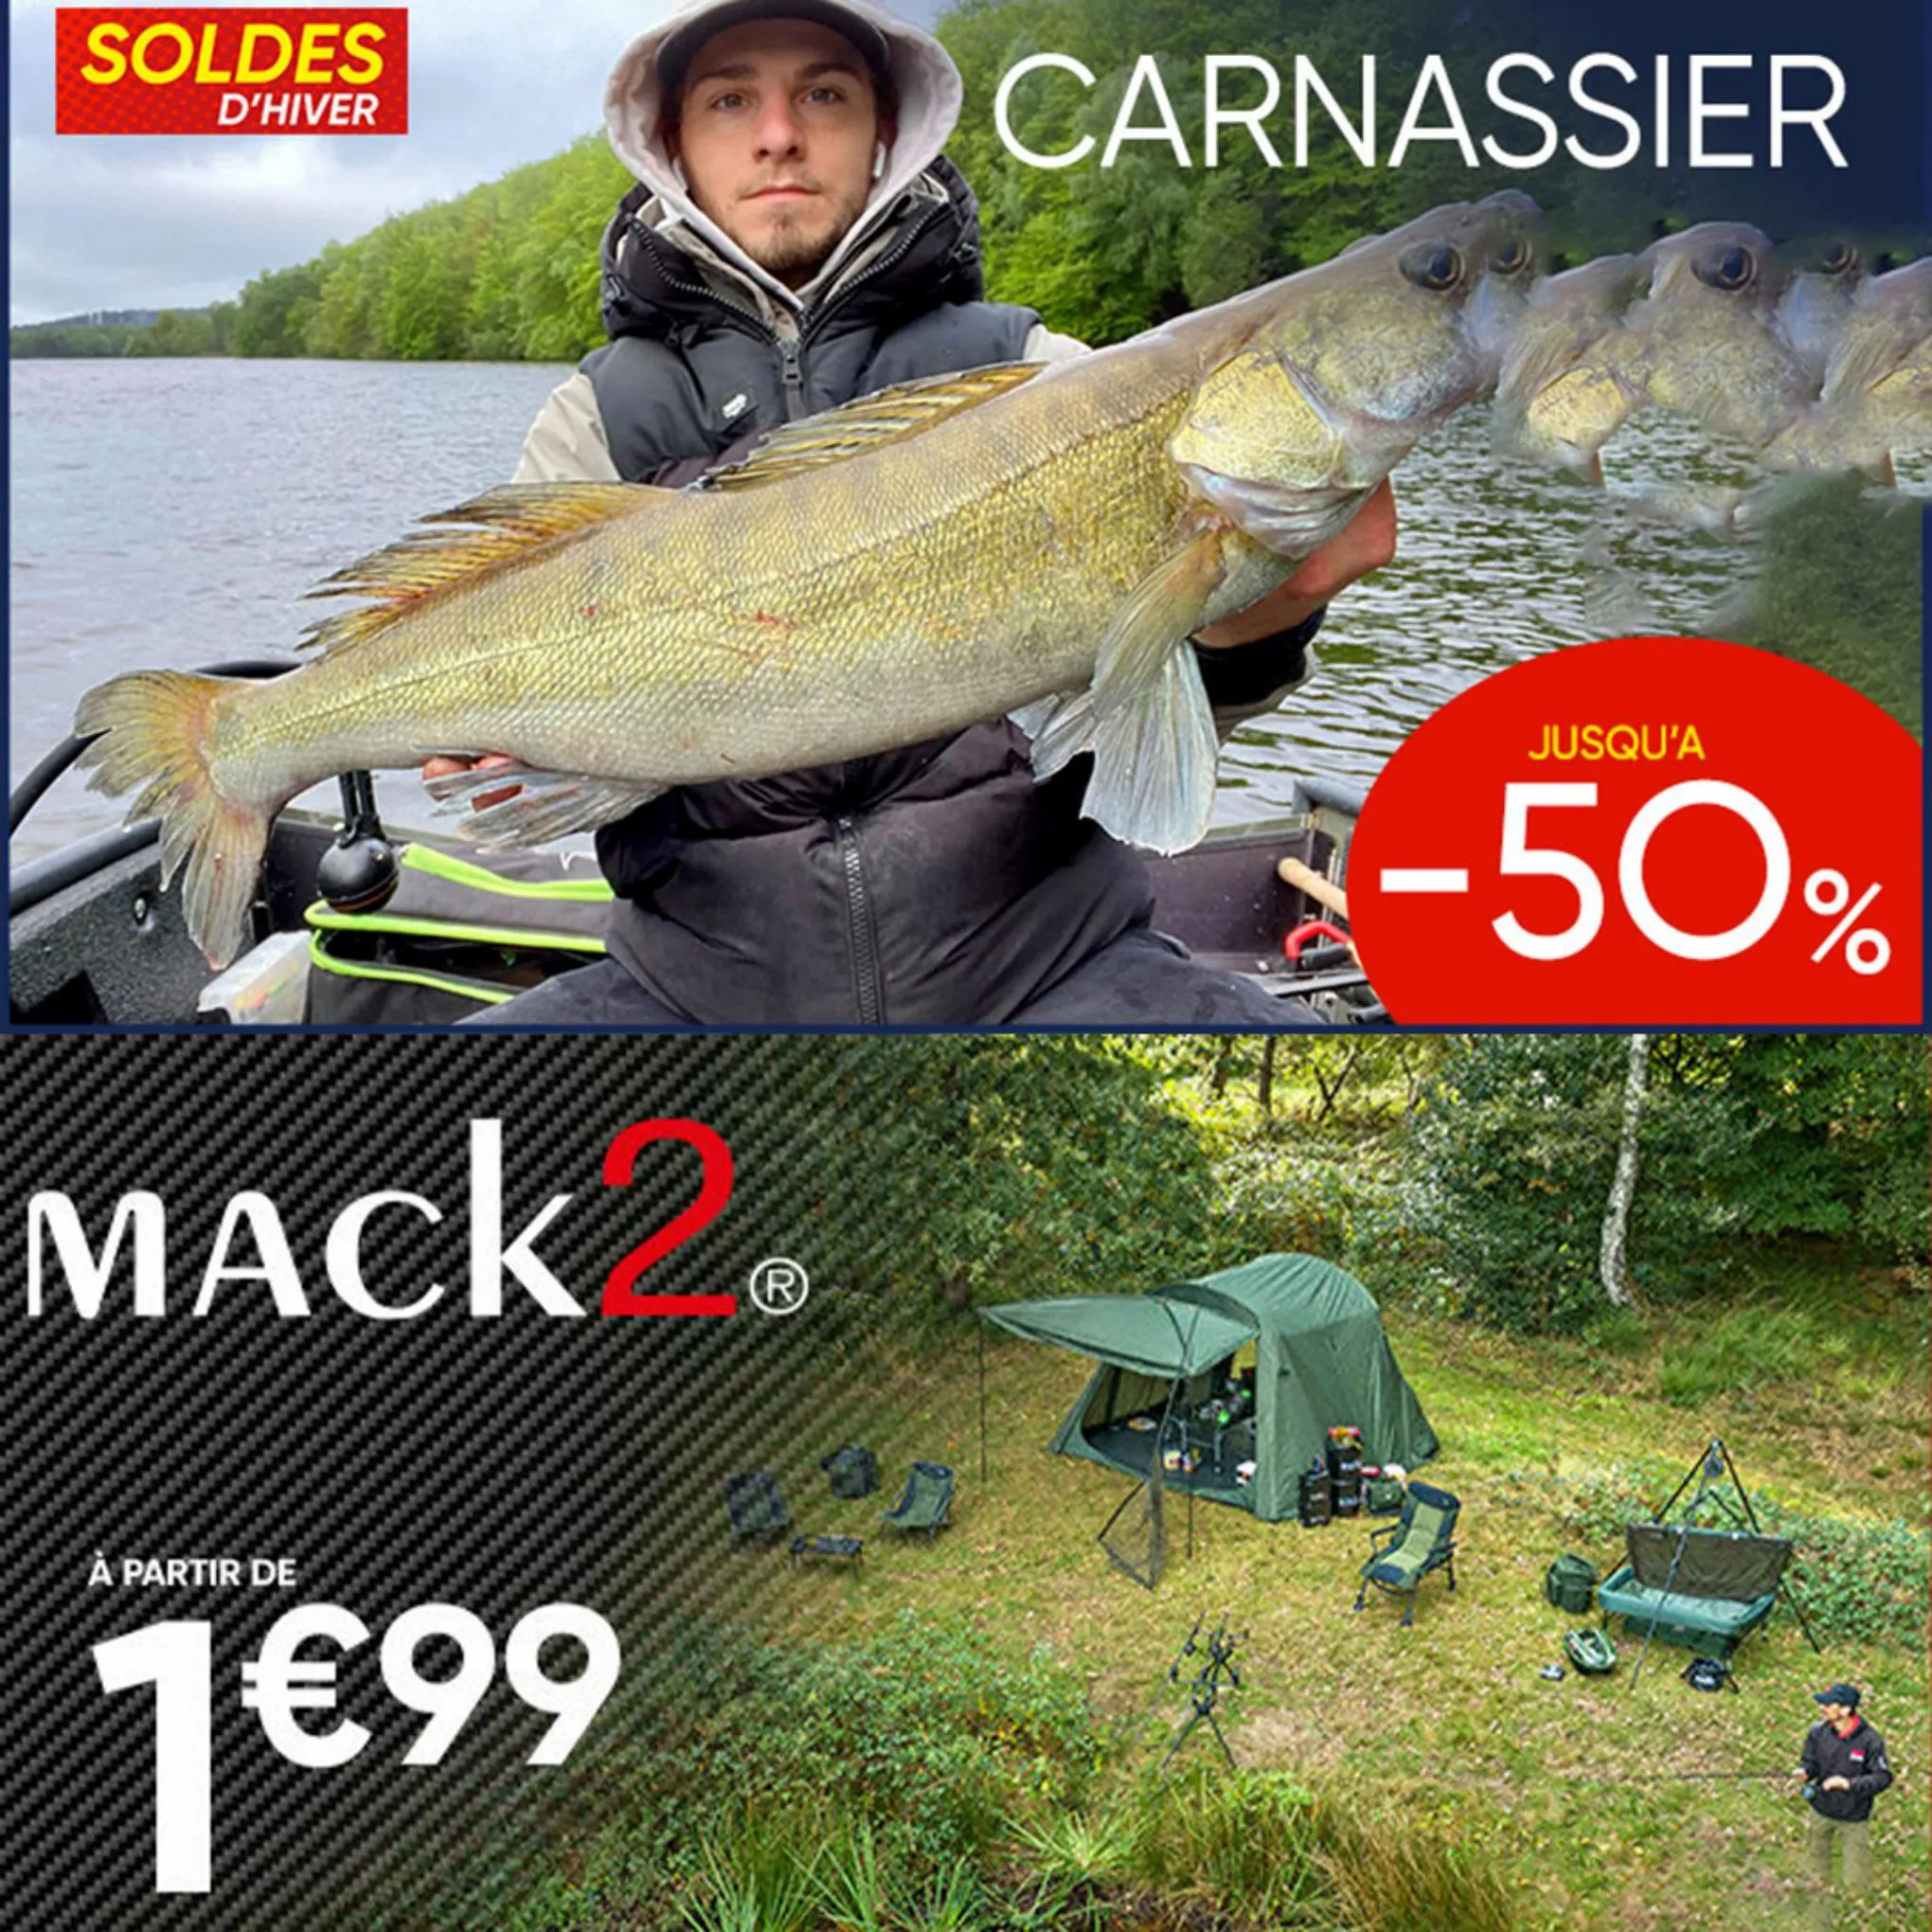 Catalogue SOLDES 70%, page 00003